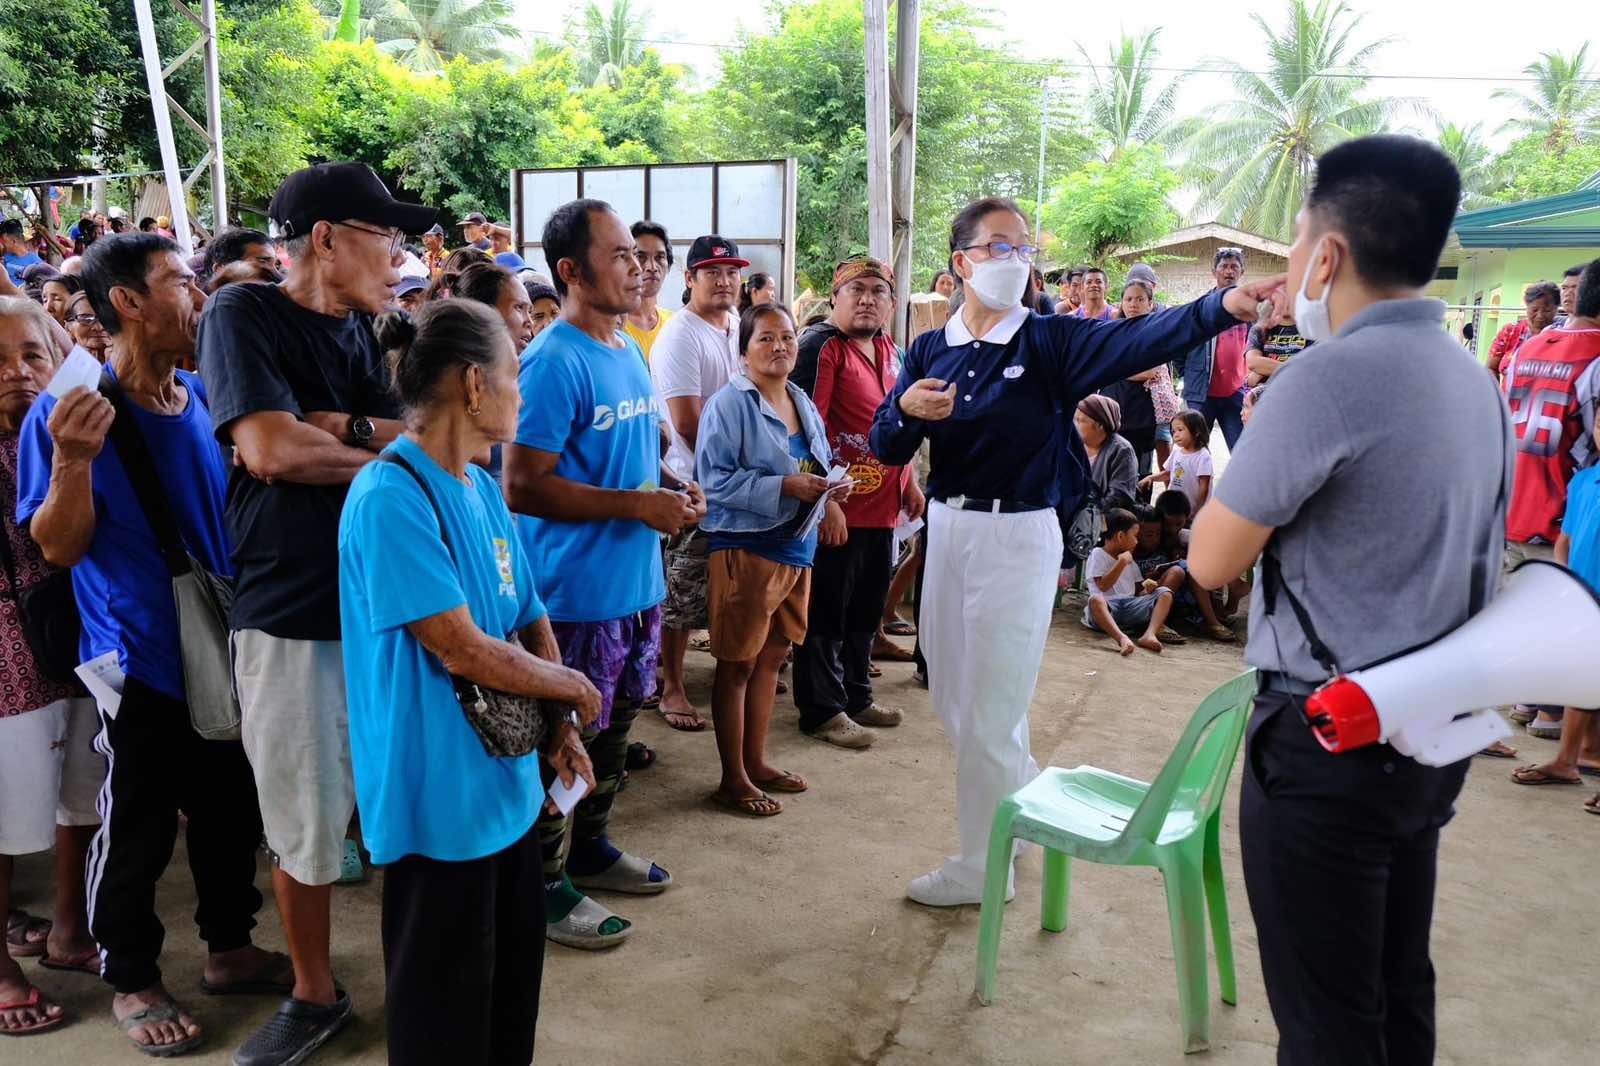 Tzu Chi Commissioner, Sis. Michelle Hsu and the Social Welfare Officer, Mr. Tantoy, are assigned to crowd control.【Photo by Tzu Chi Davao】